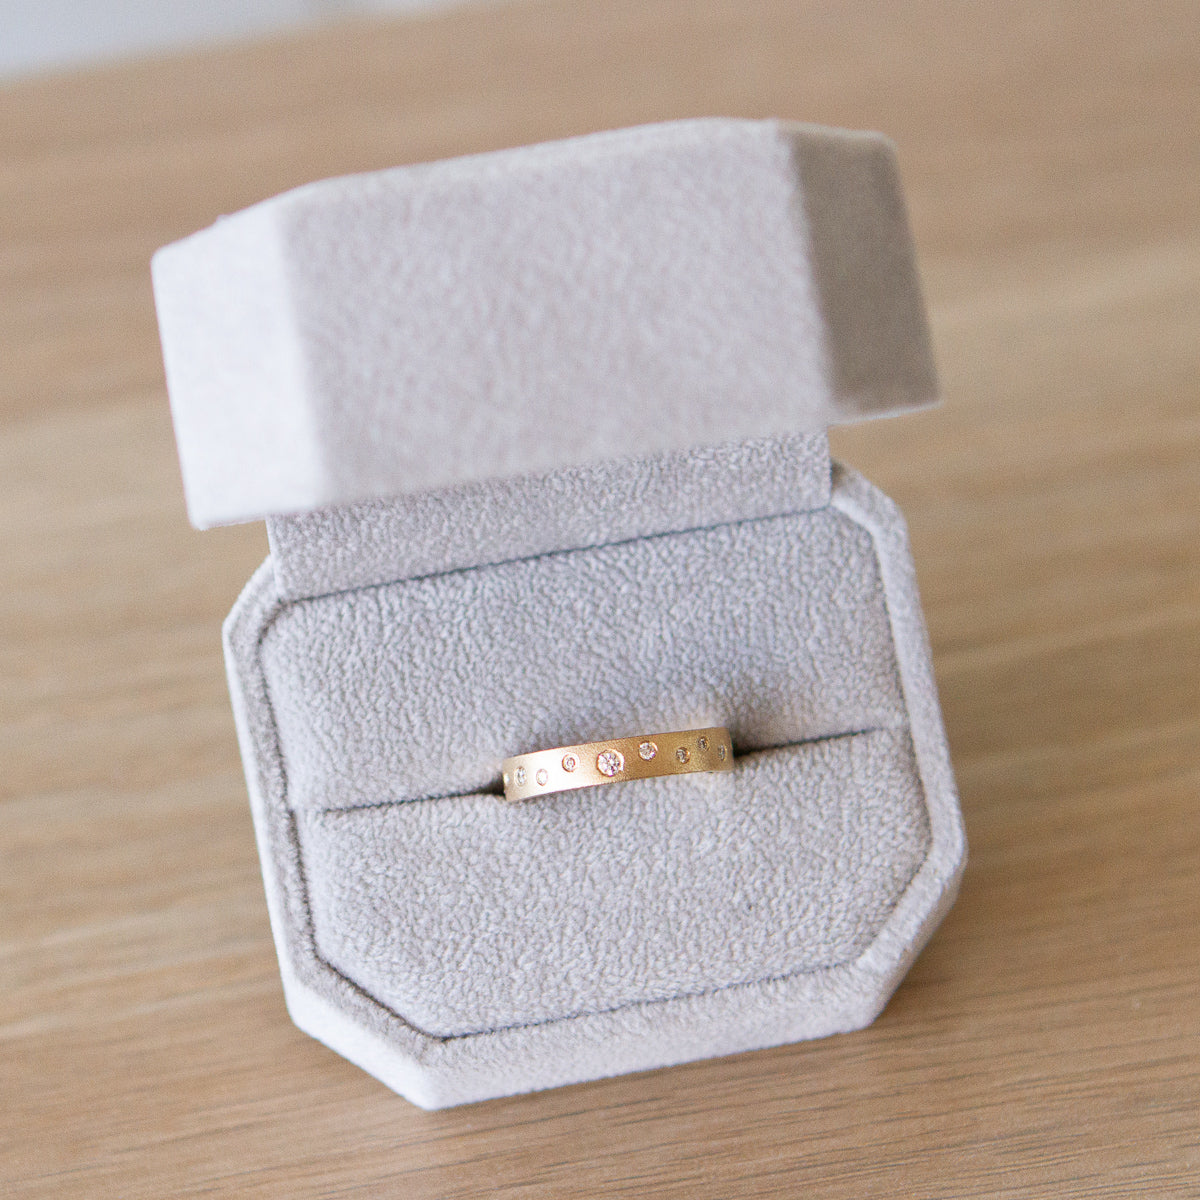 Yellow gold matte texture wide wedding band with scattered flush set diamonds by Corey Egan in a ring box